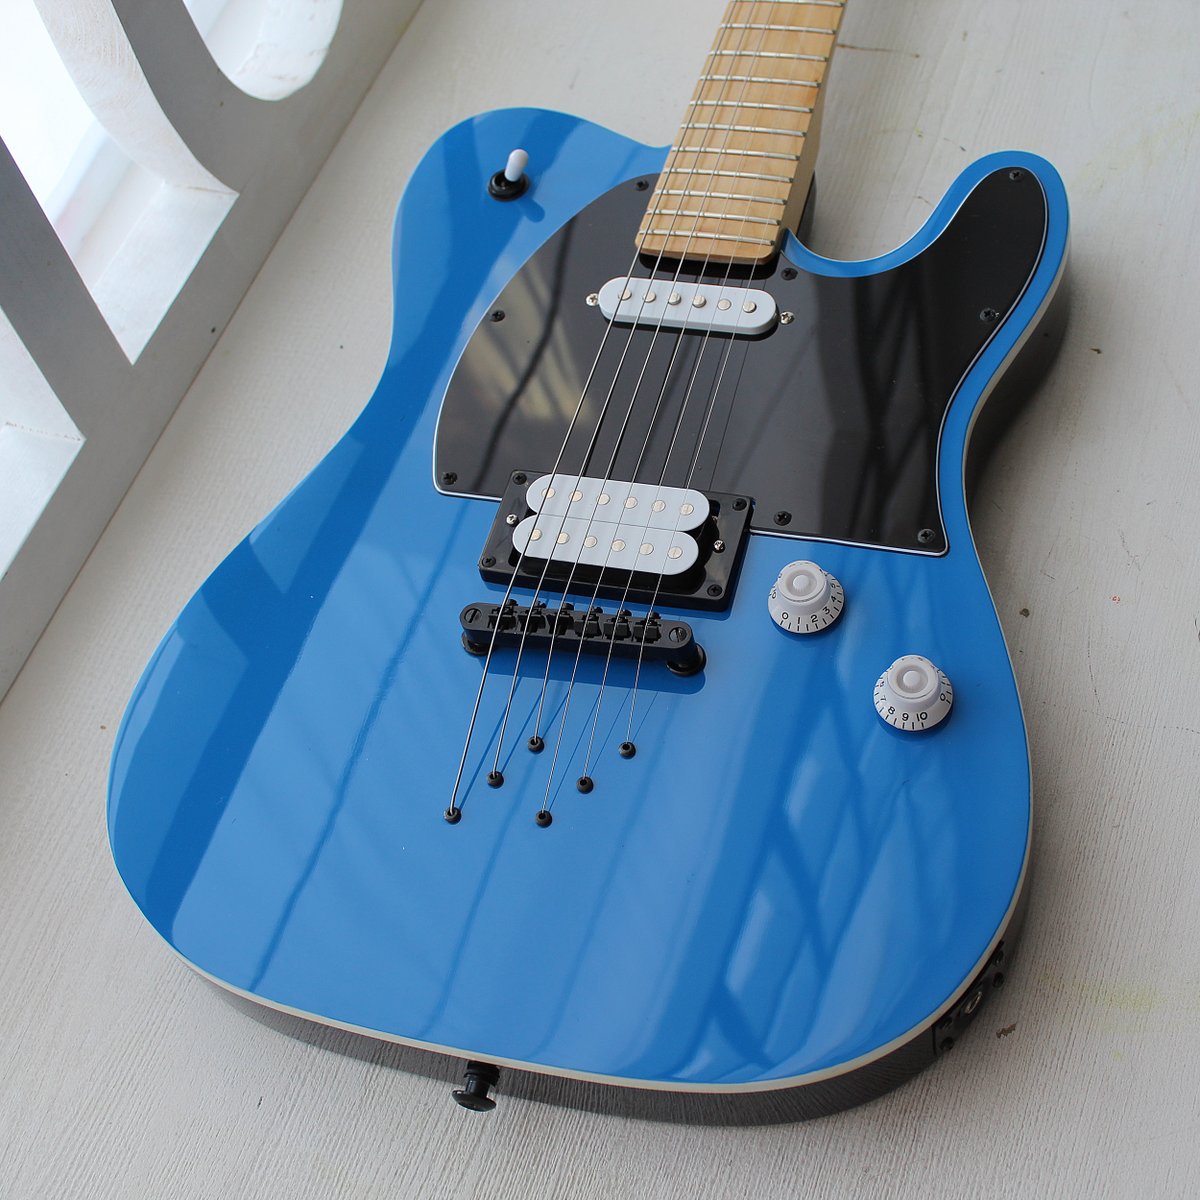 If you headbang the hell out on your gigs, do it classy! With a perfect metal machine, Kononykheen Breed Thirty Seven guitar
#blueguitar #guitarporn #rigshare #kononykheen